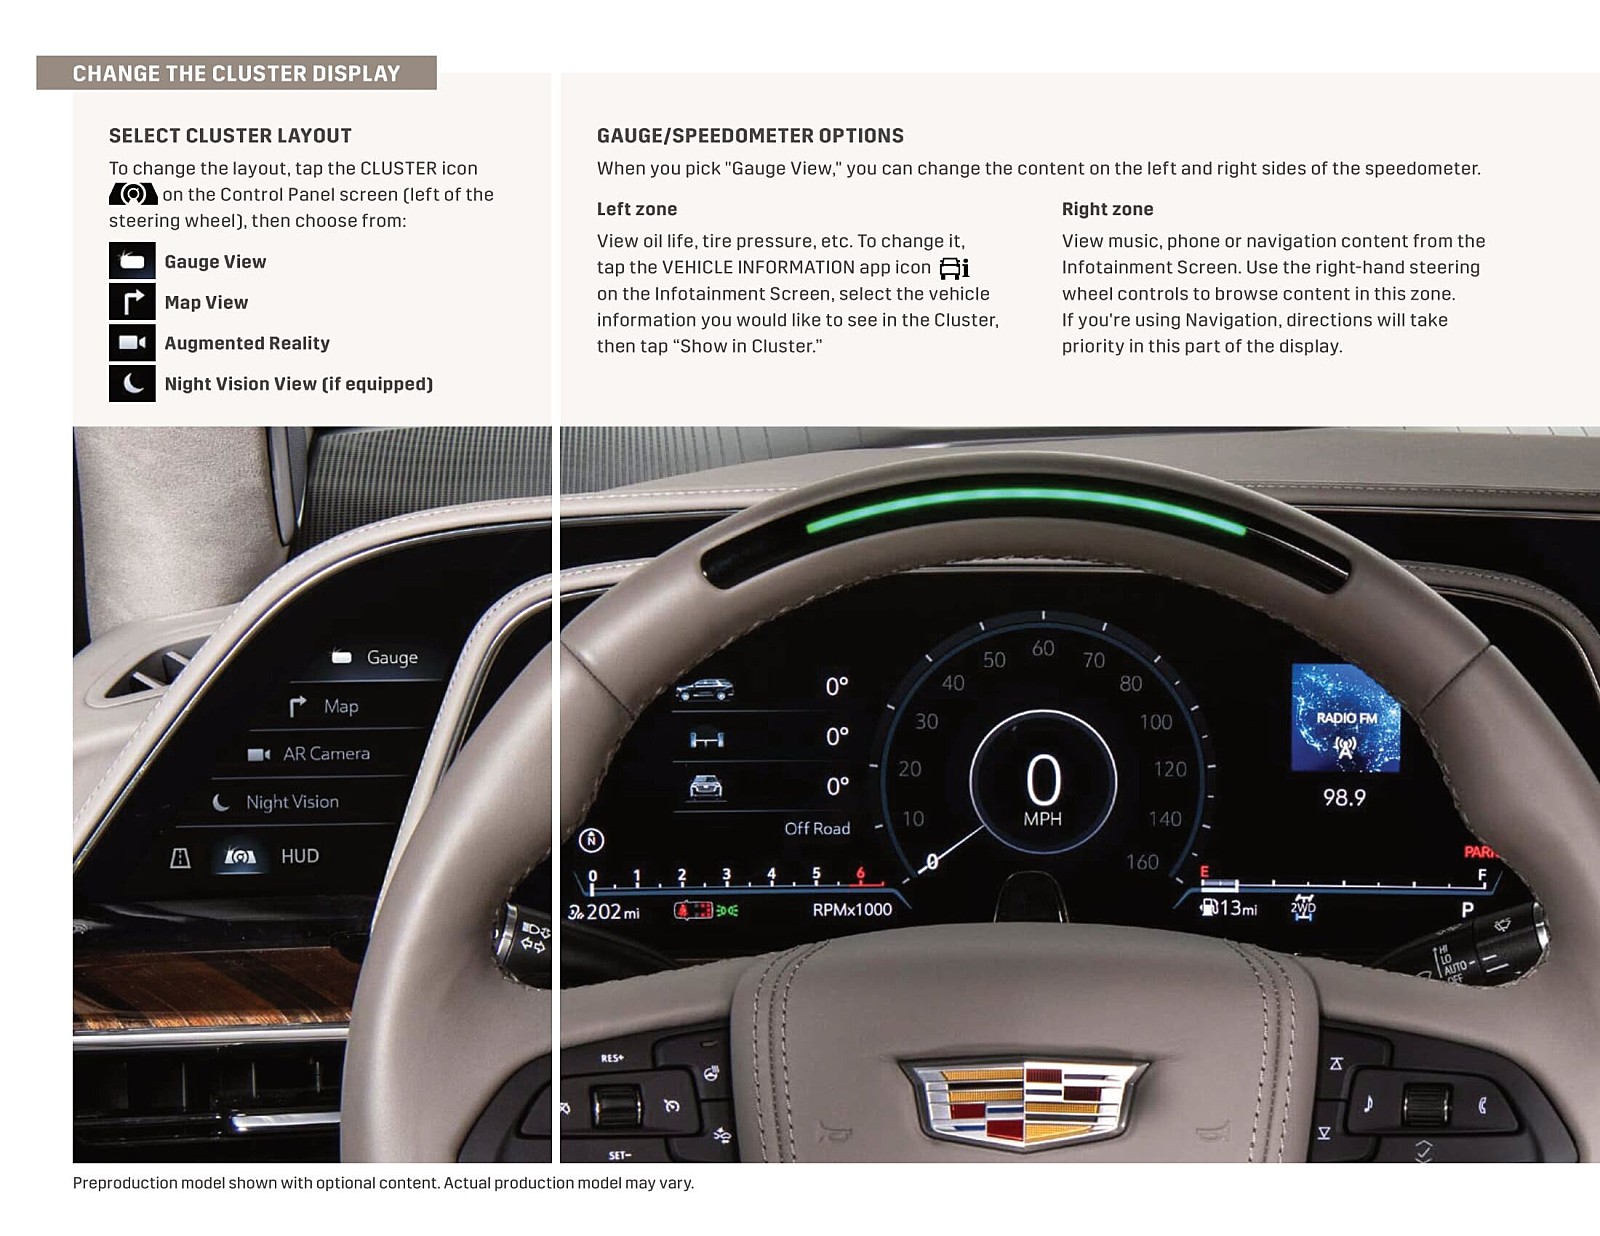 2021-cadillac-escalade-oled-infotainment-system-quick-start-guide-v2_0002.jpg?type=w1600